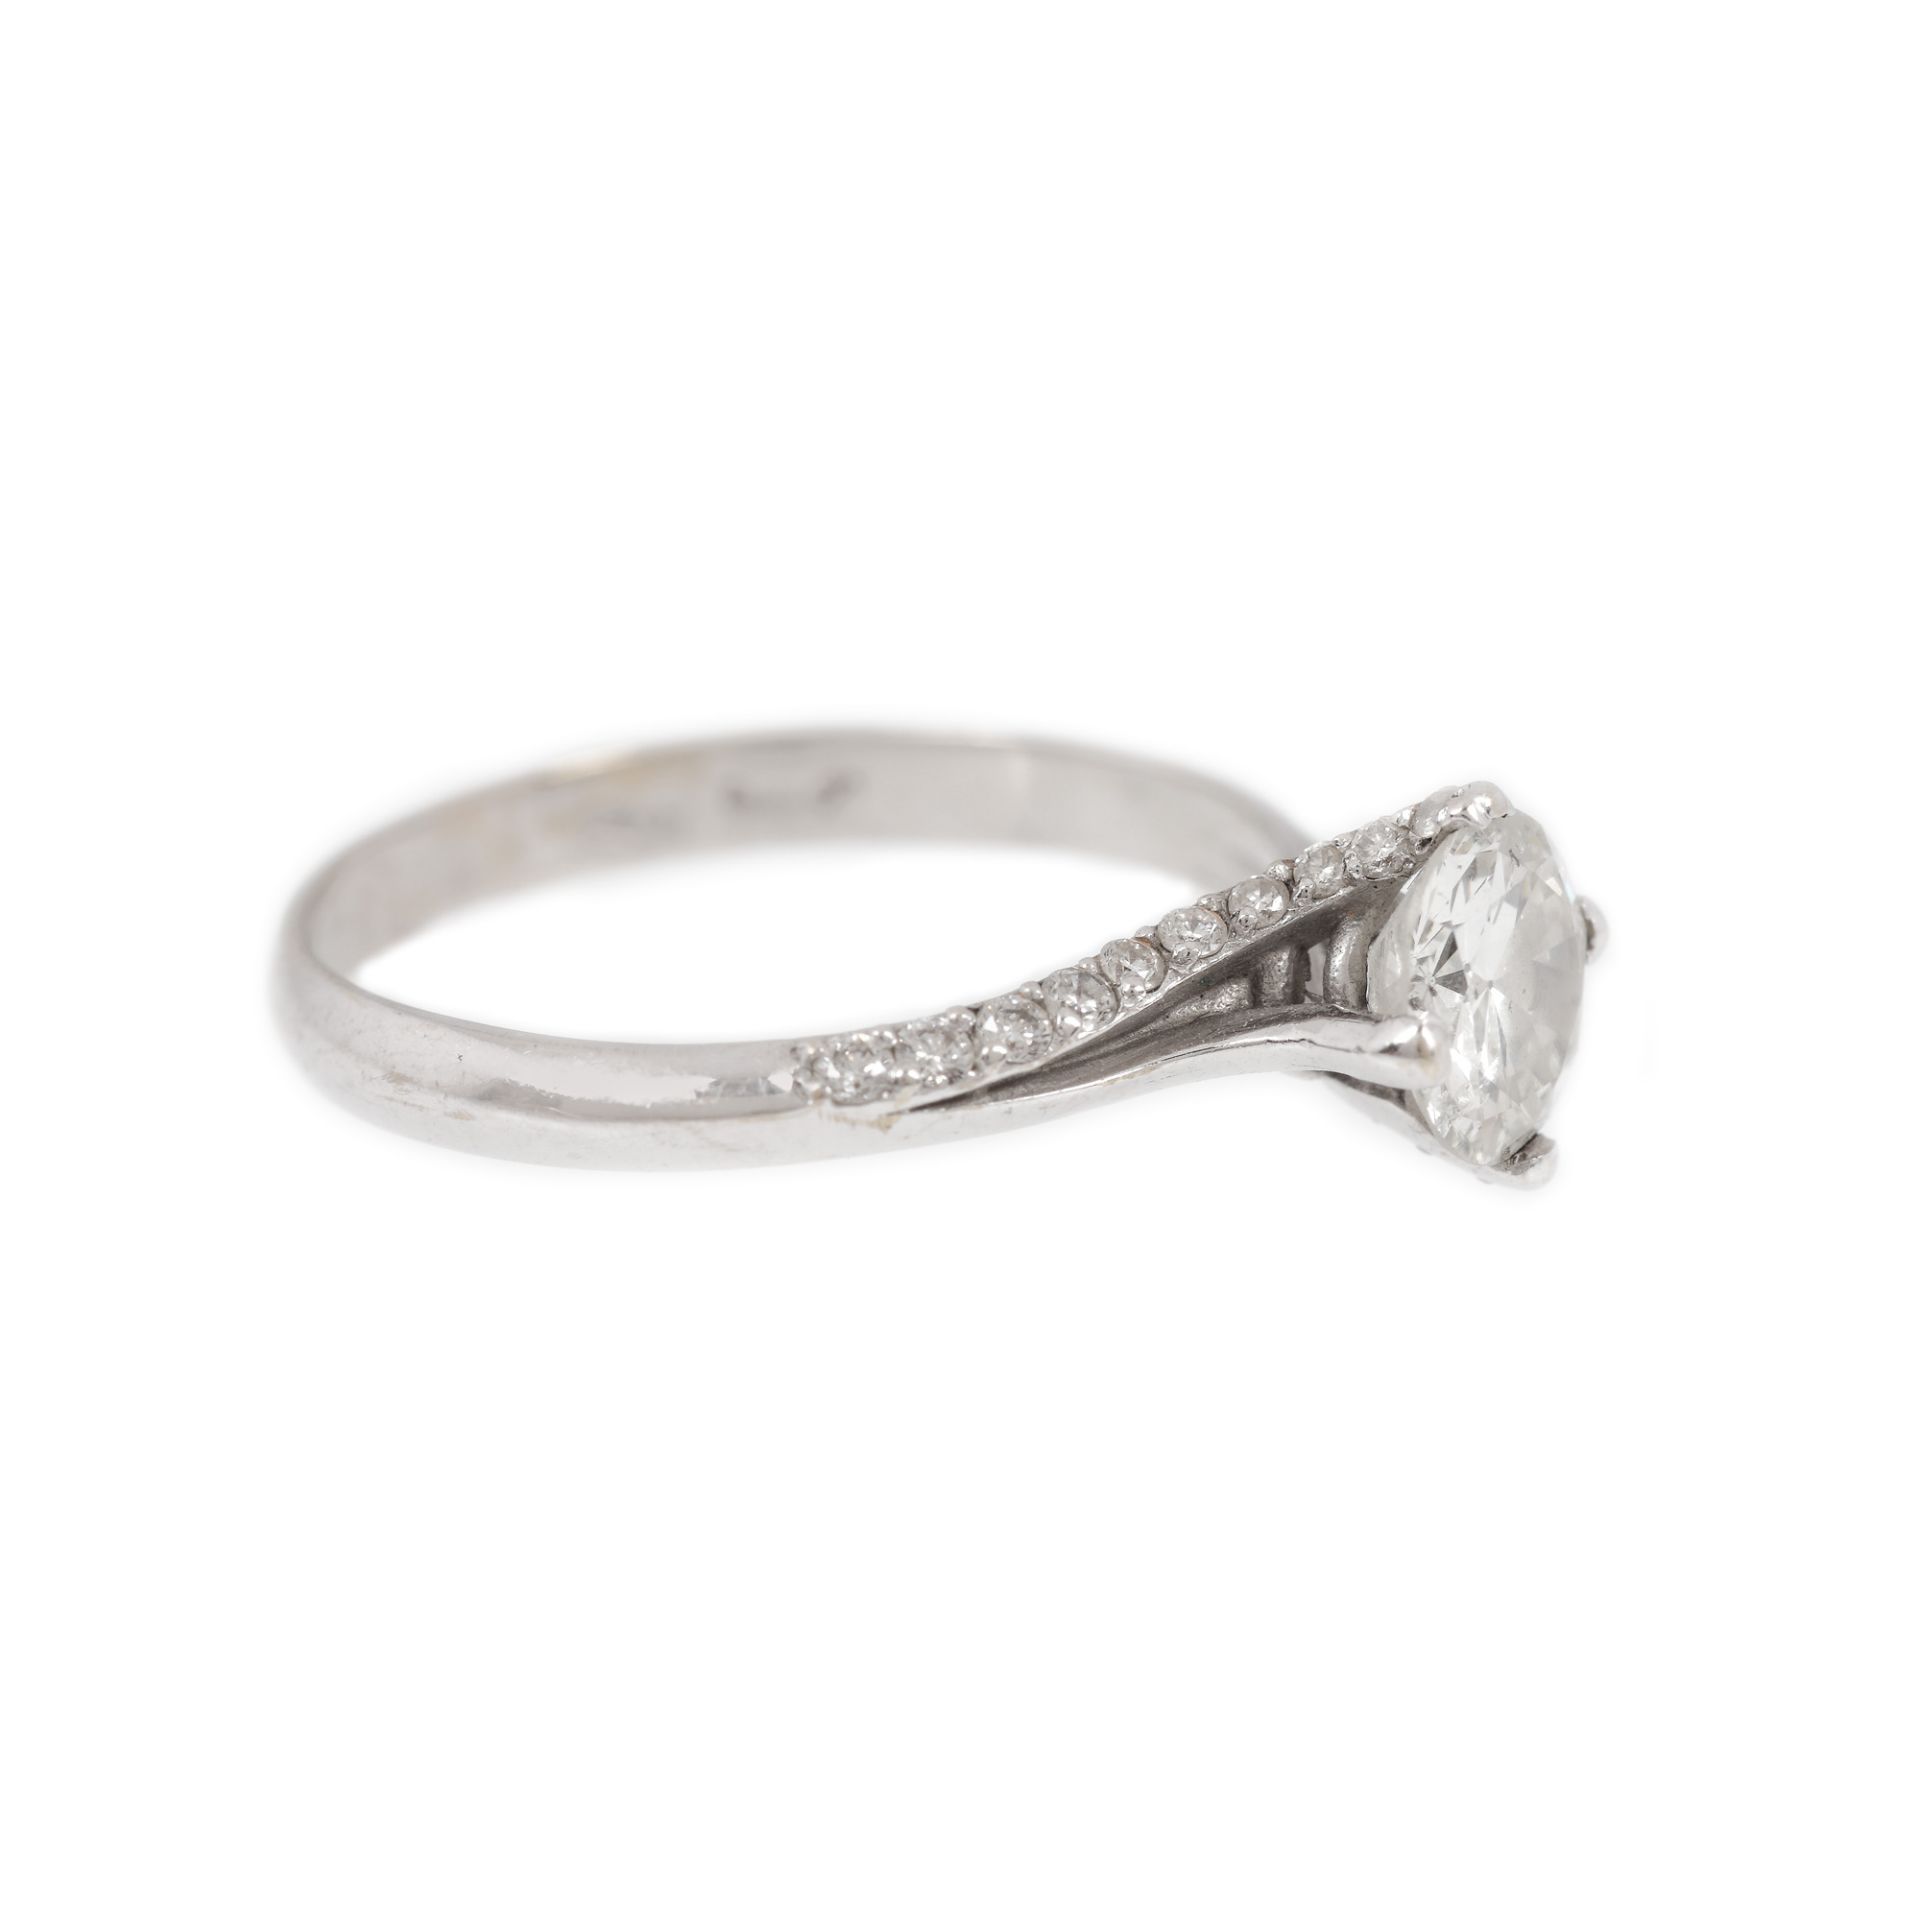 White gold ring, centrally decorated with a diamond and paved with diamonds - Image 2 of 3